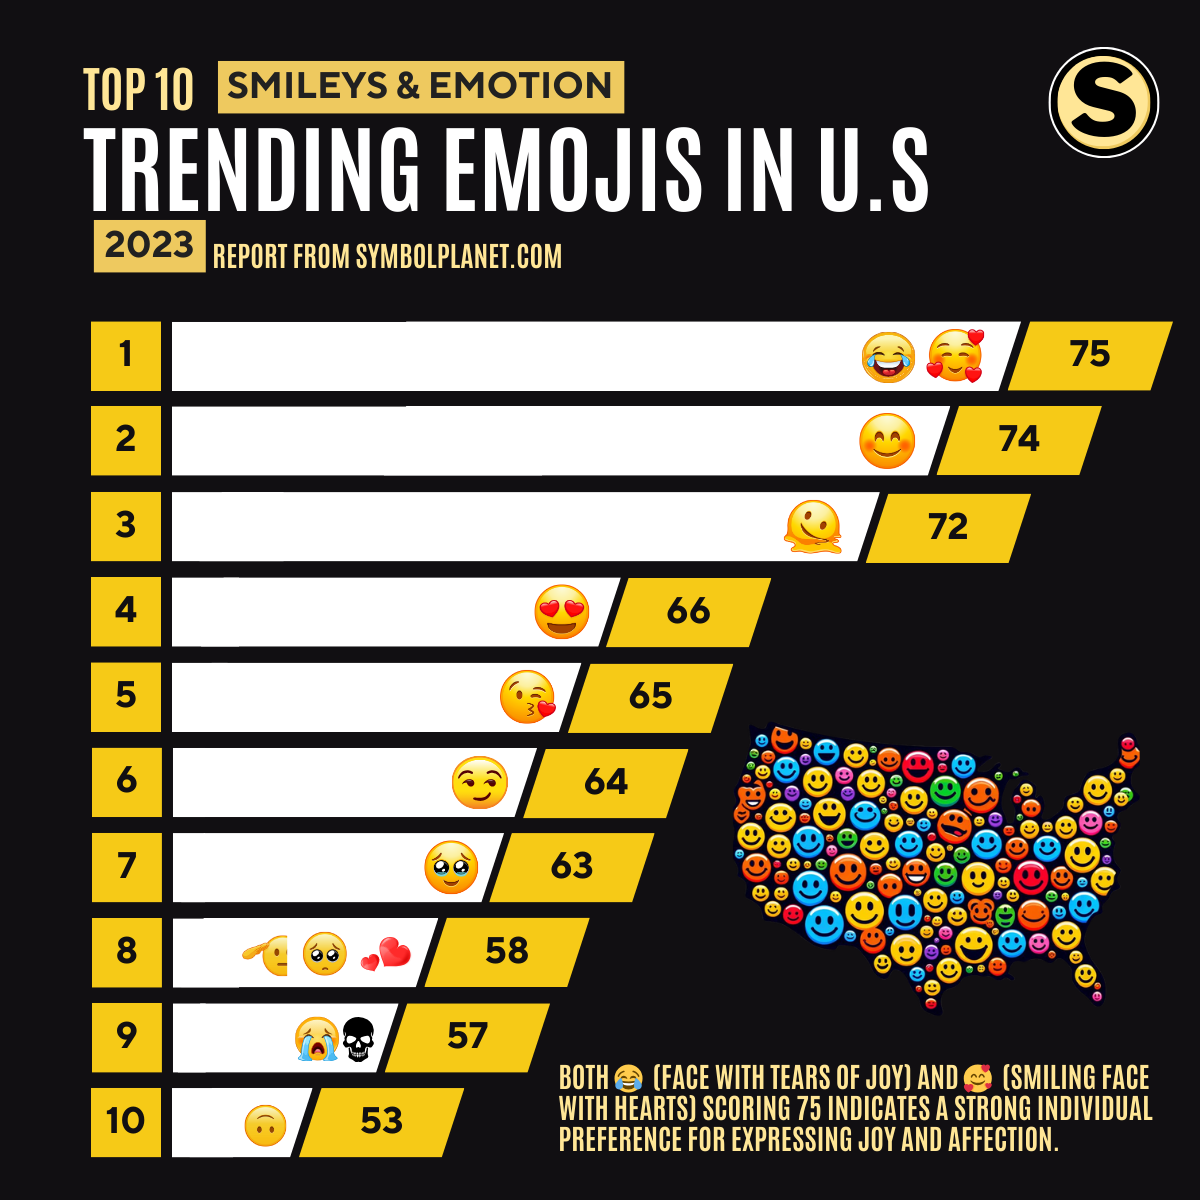 Top 10 Trending Smileys & Emotion Emojis of 2023 in the United States